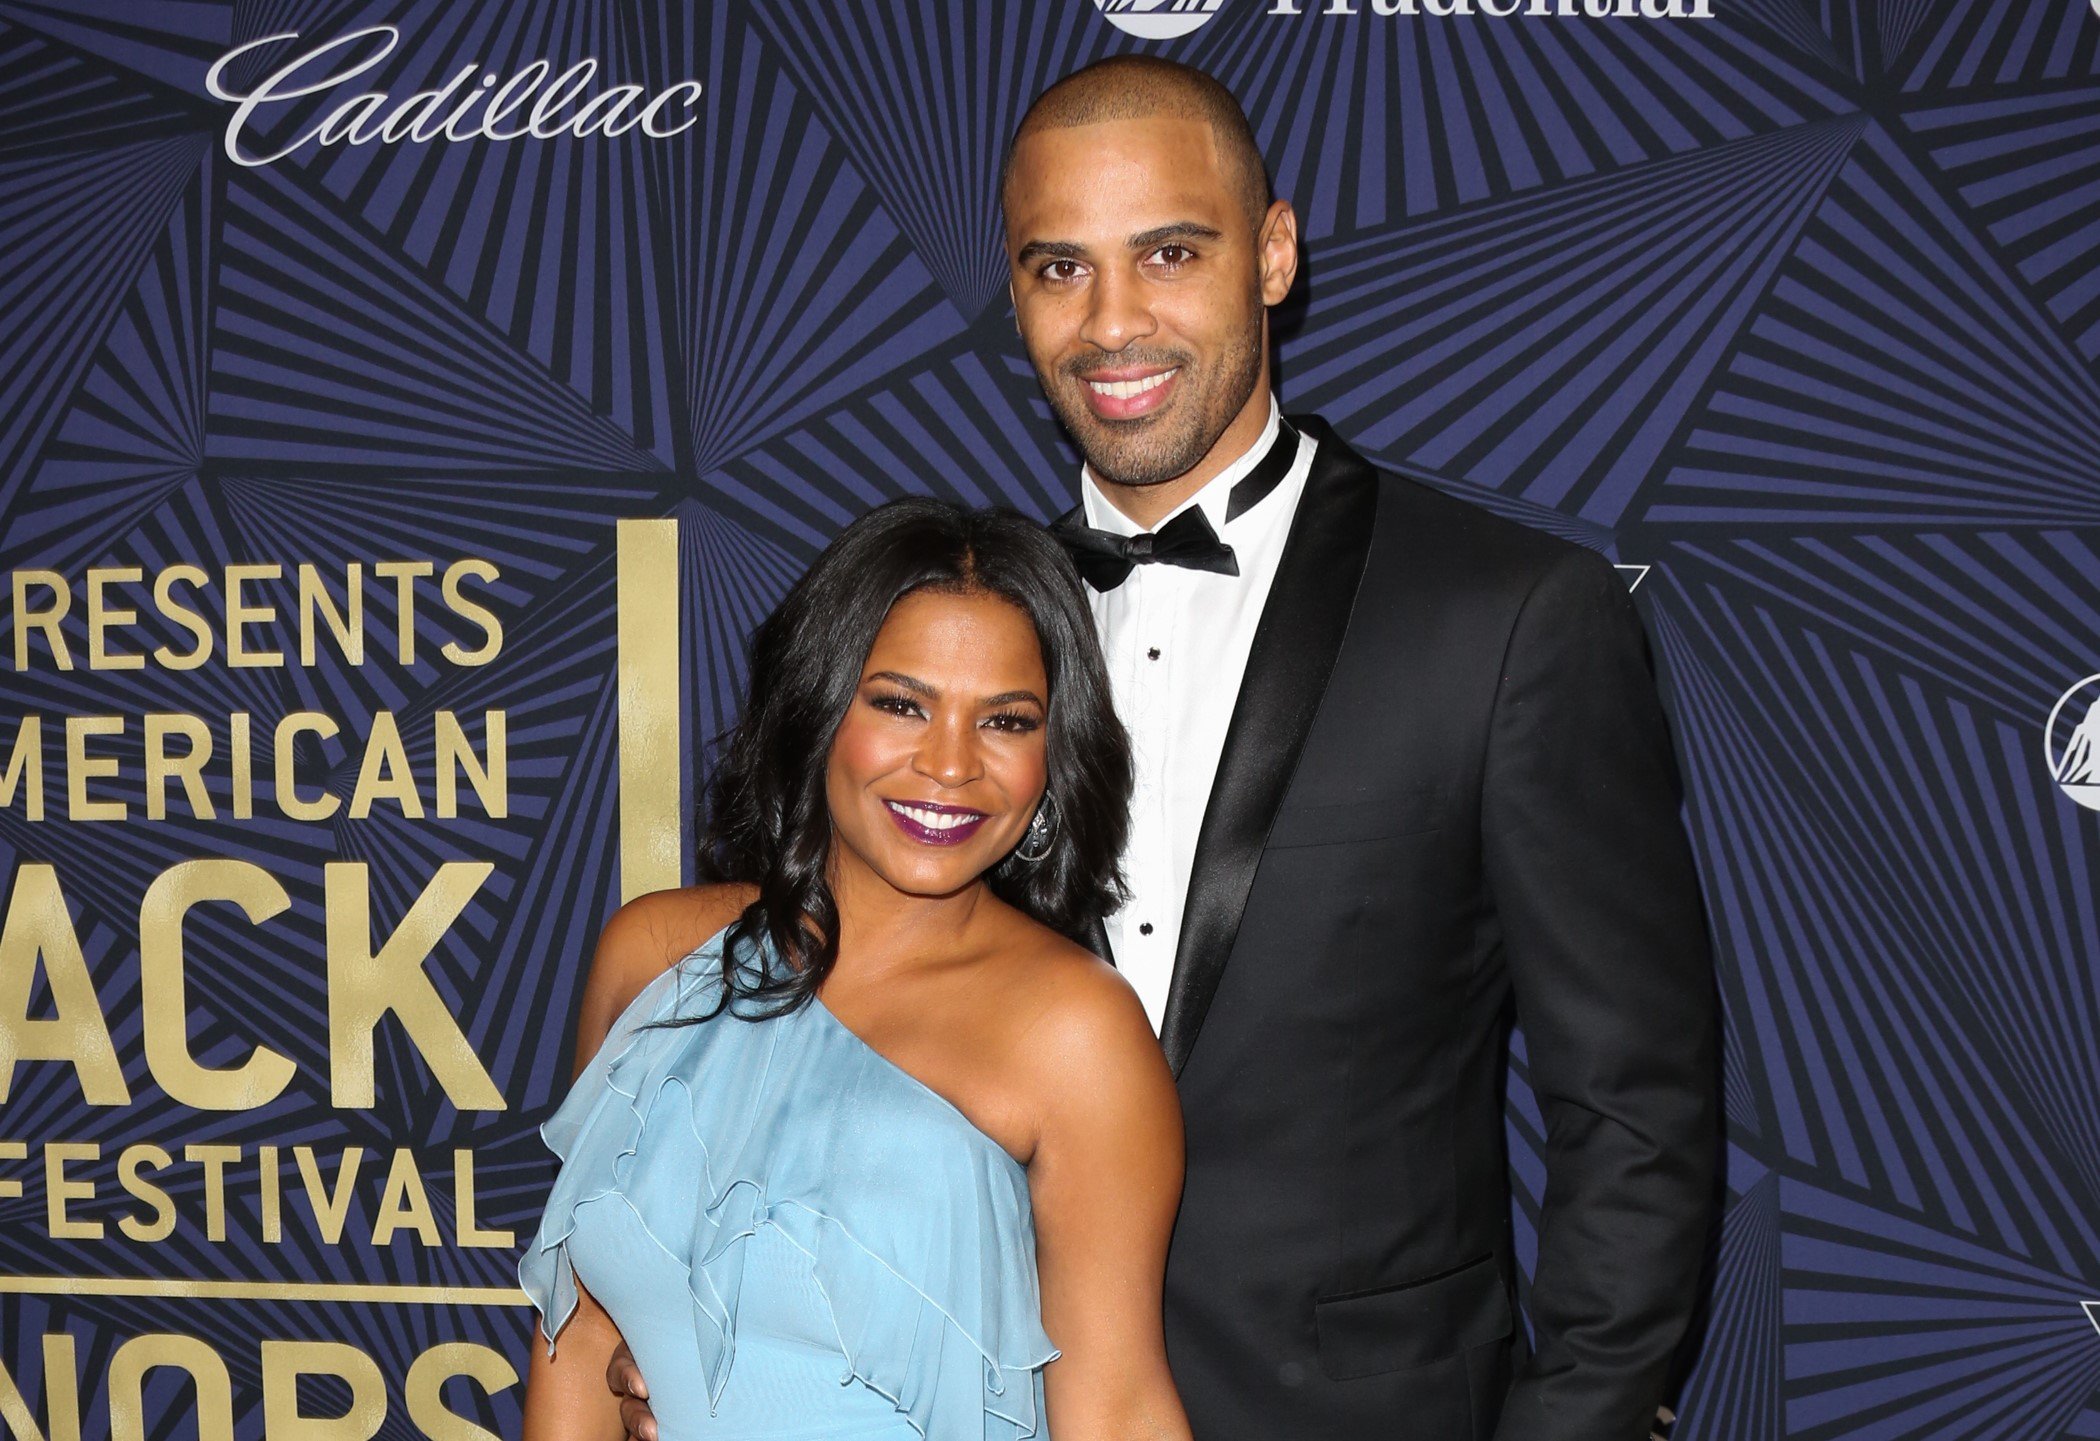 Nia Long and Ime Udoka pose for a photo together on carpet at the BET Awards